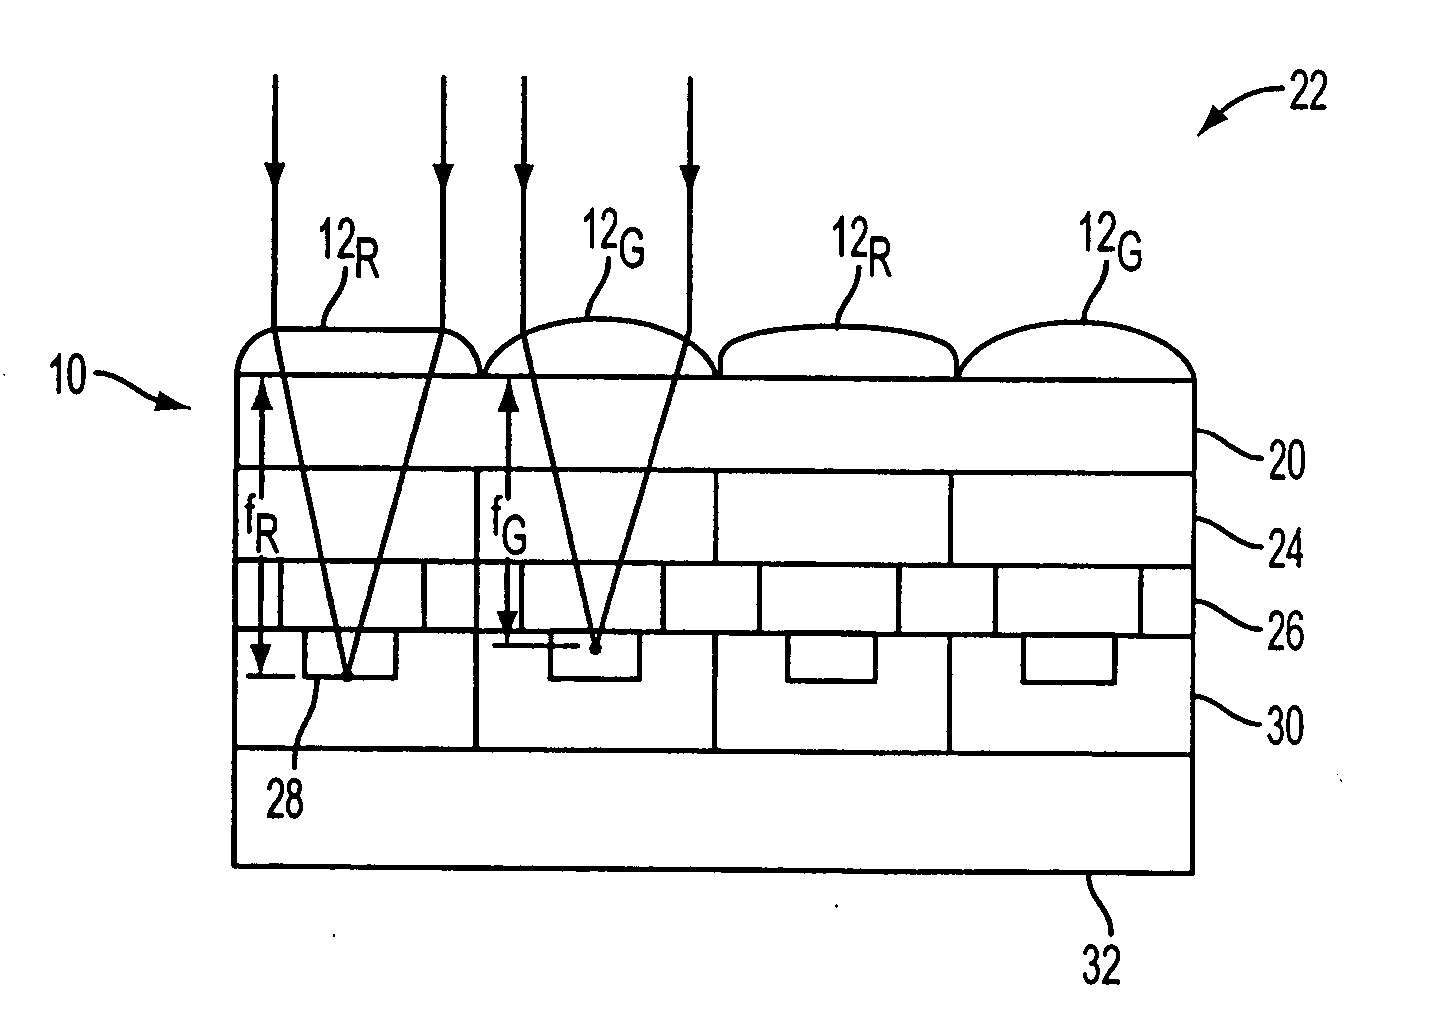 Controlling lens shape in a microlens array